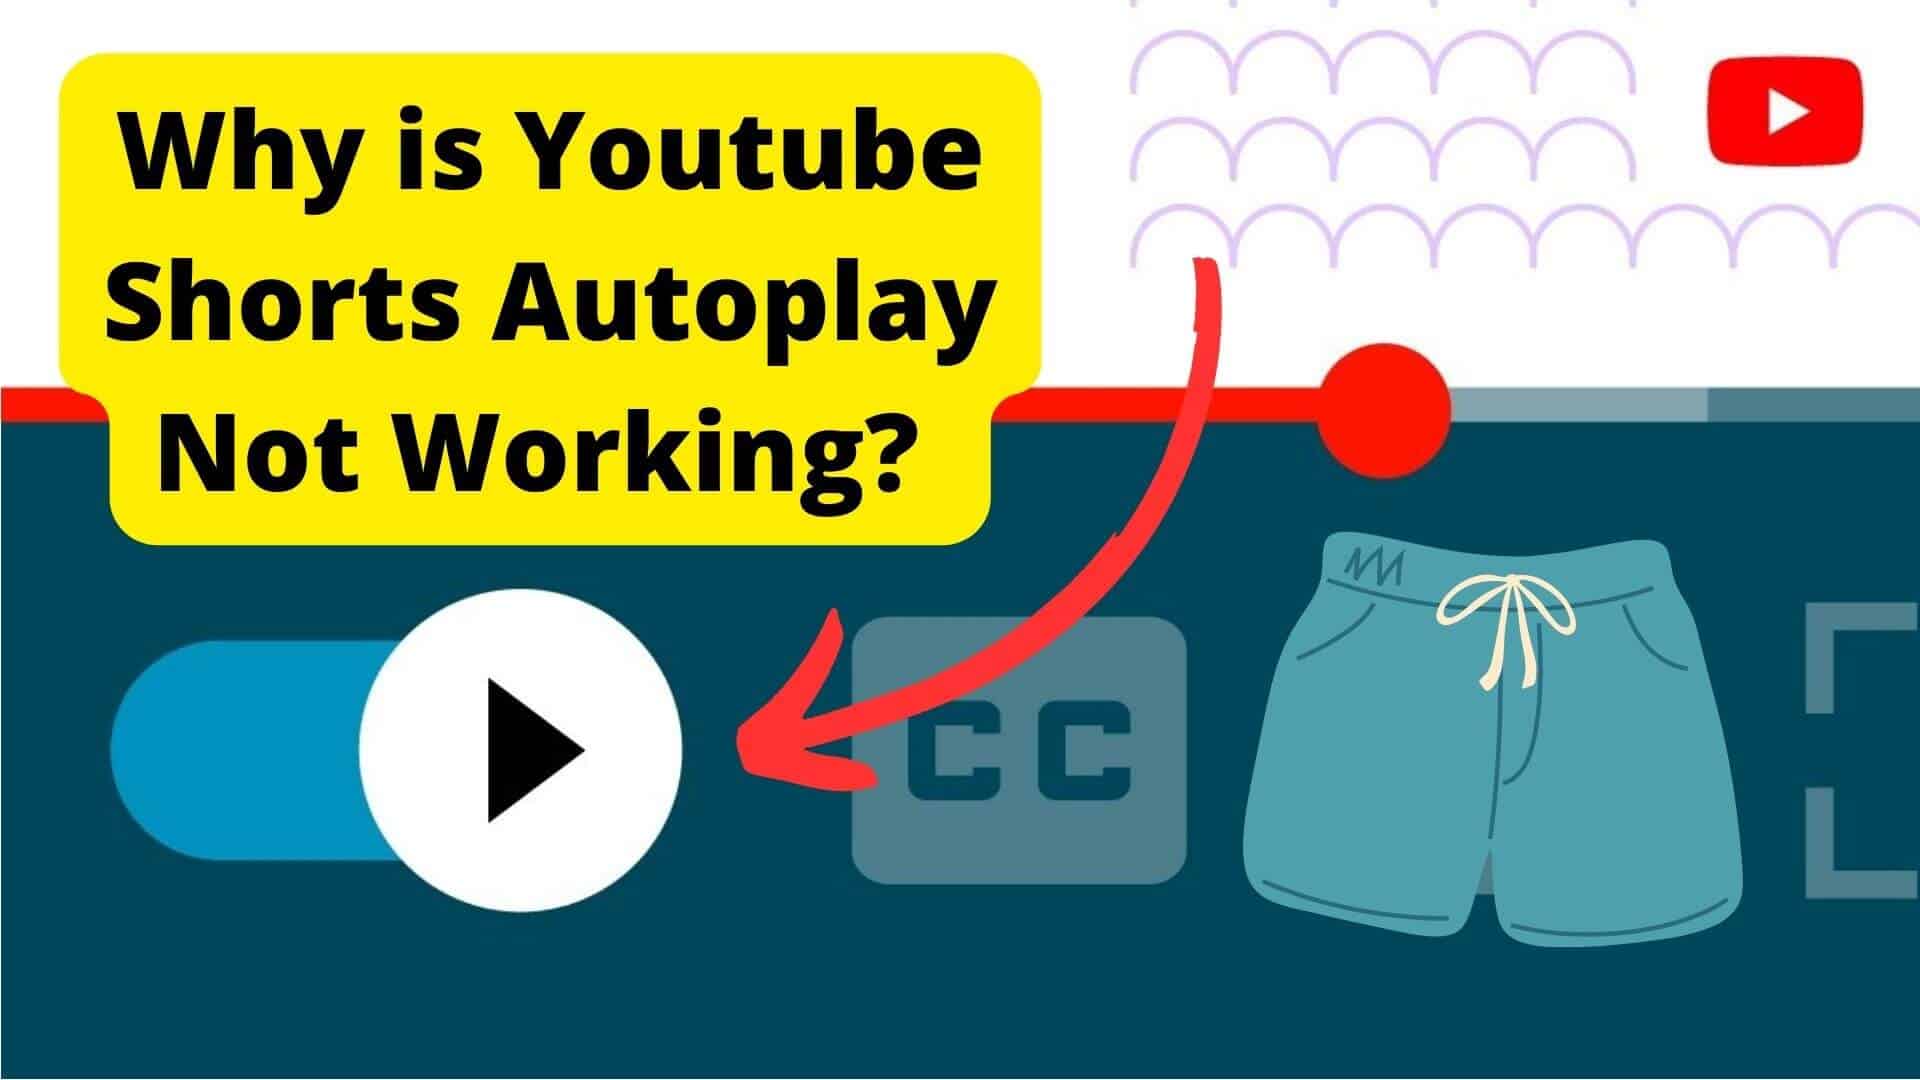 youtube shorts autoplay not working